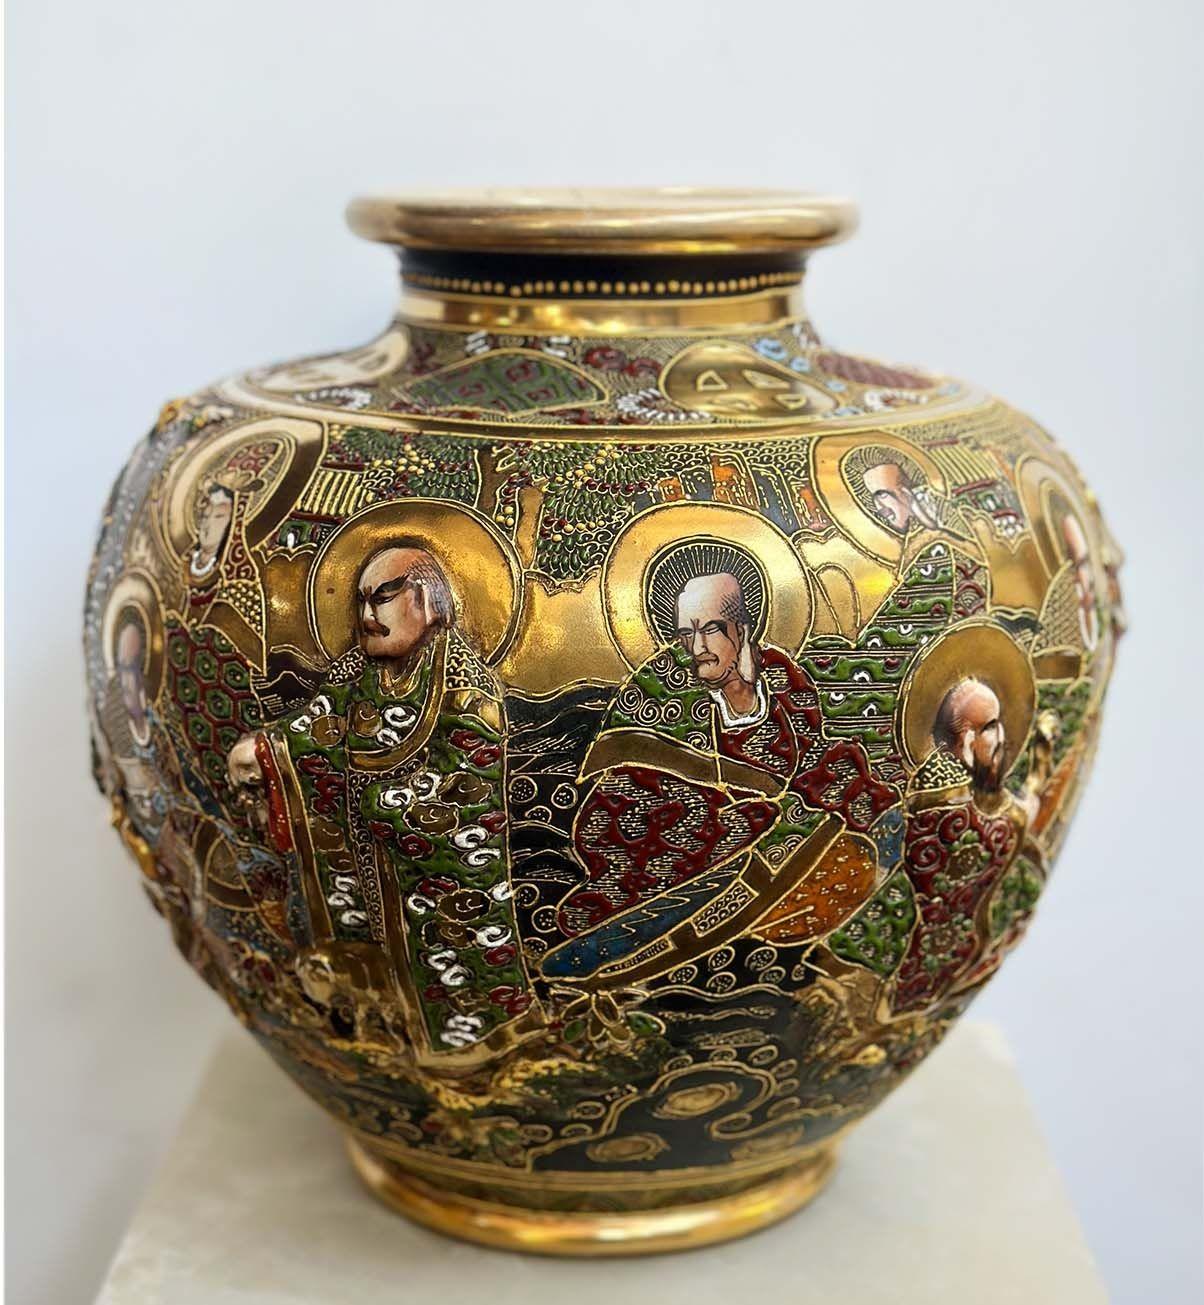 Antique Satsuma gilt porcelain vase depicting hand painted immortal figures all around the piece in high relief. Made in Japan, c. 1900's.
*Includes mark on base.
Dimensions:
11.5